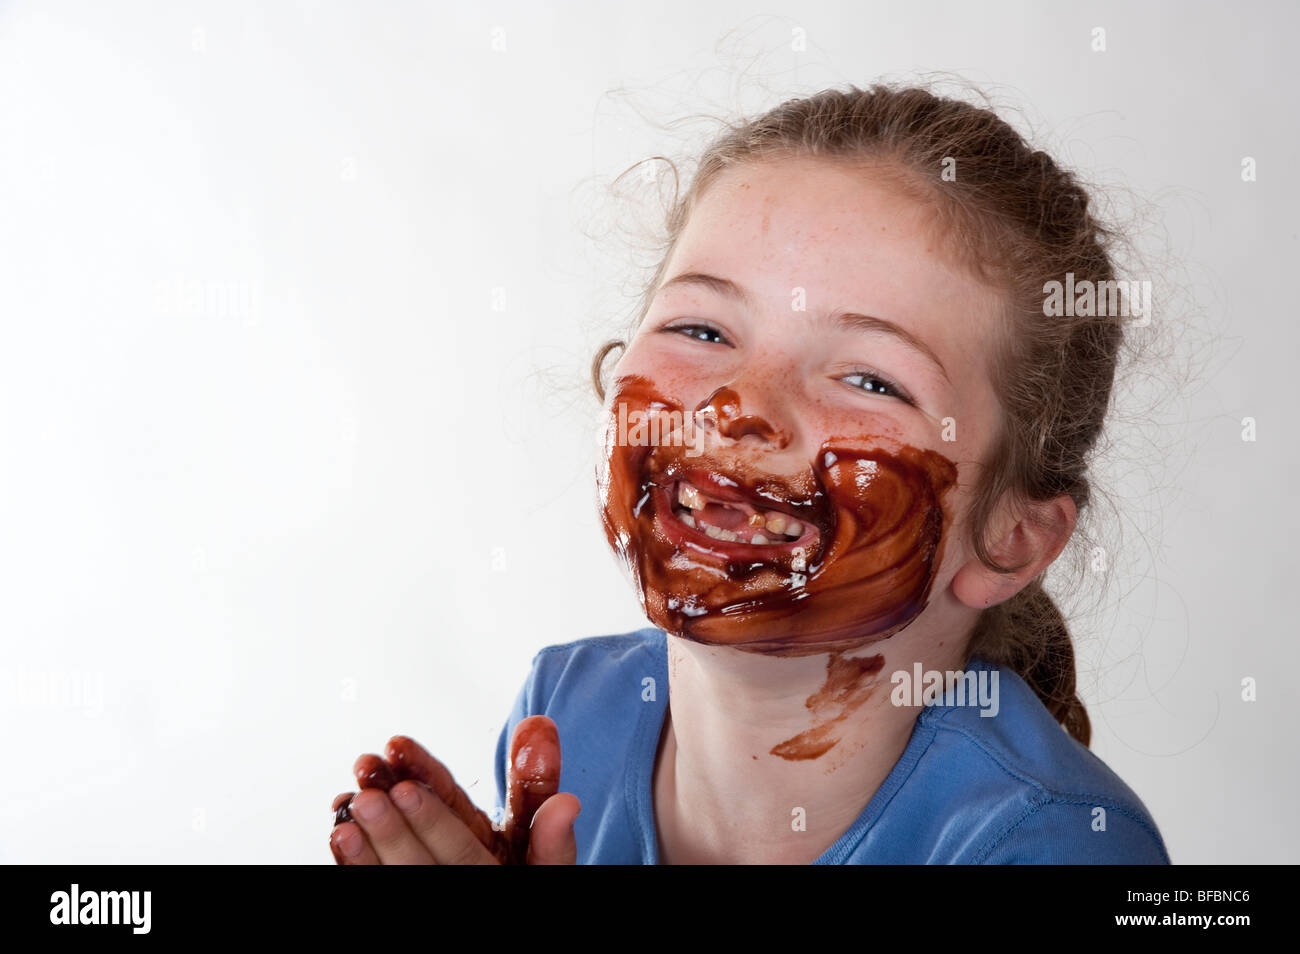 little girl laughing with chocolate covered face Stock Photo